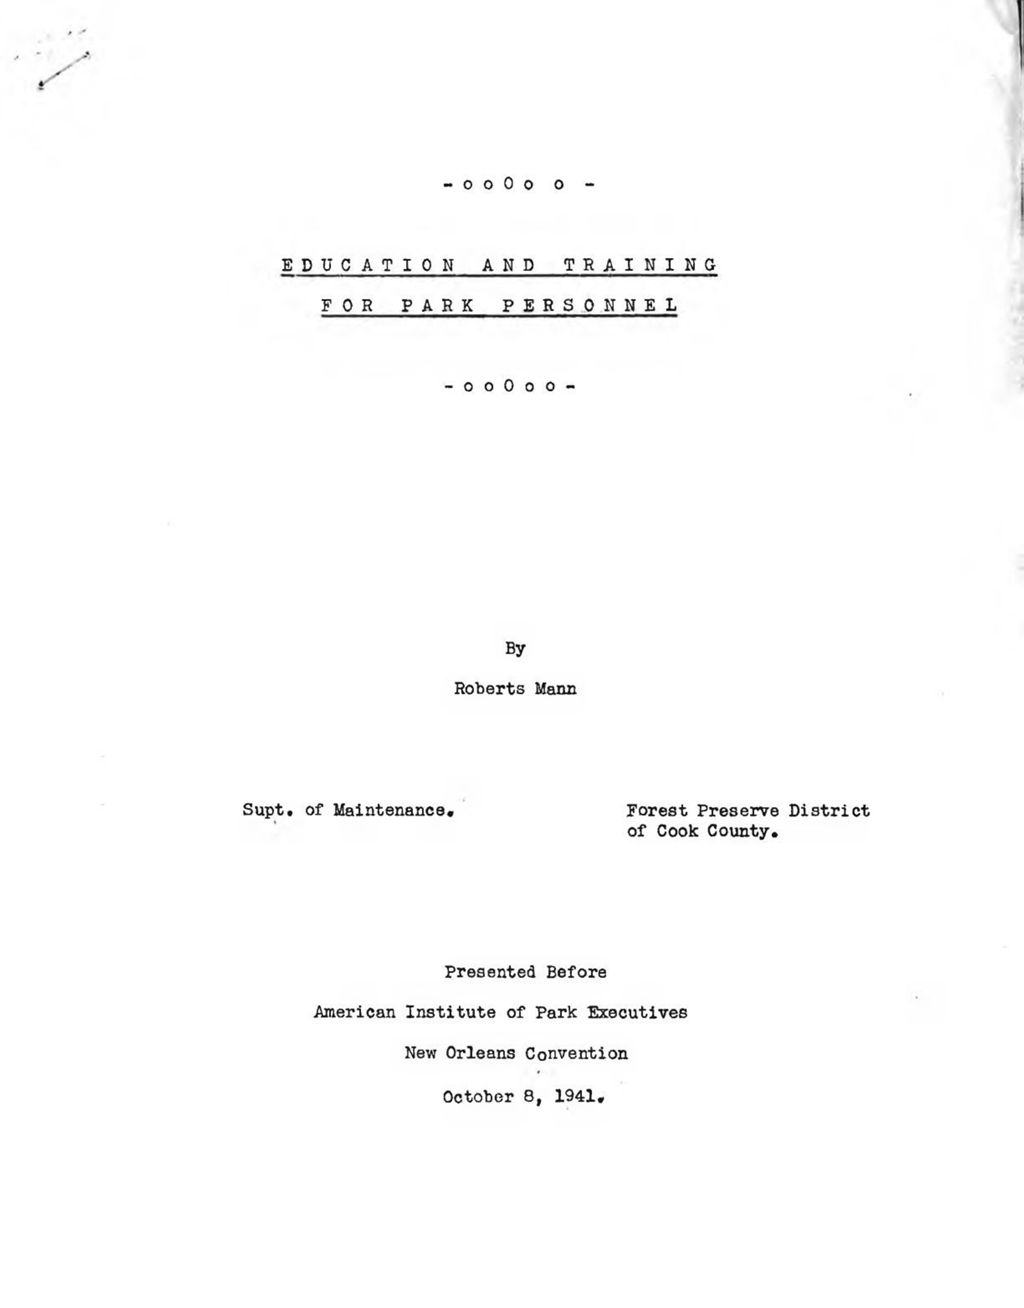 Paper on education and training for park personnel, by Roberts Mann, 1941